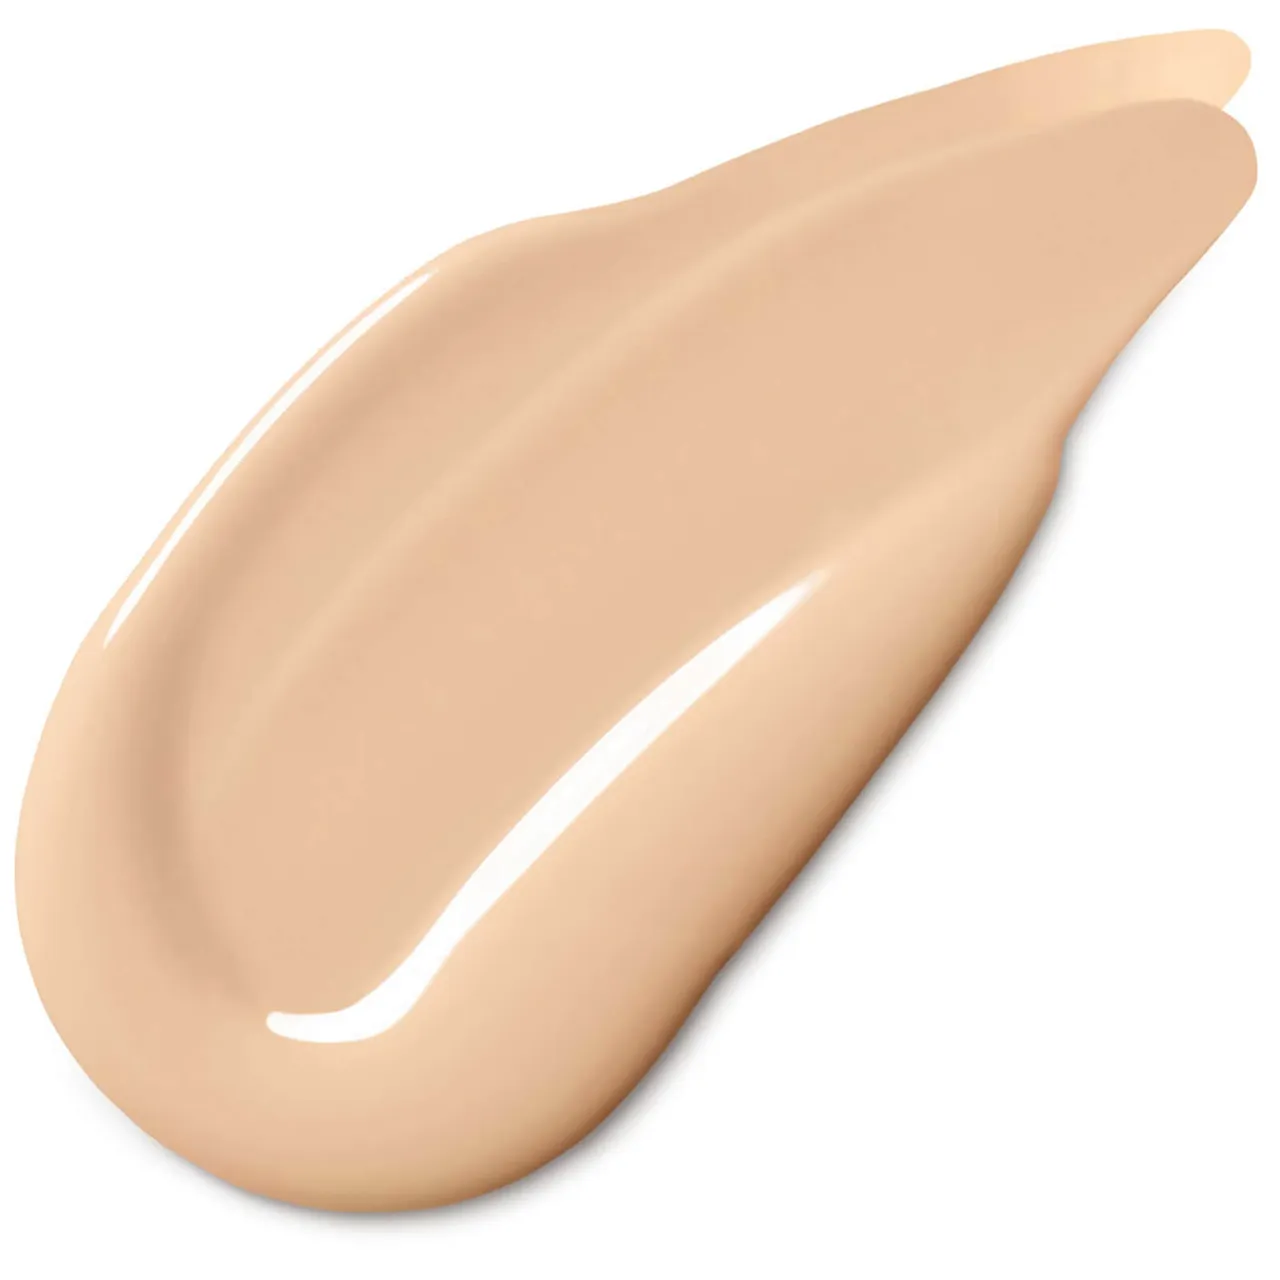 Clinique Even Better Clinical Serum Foundation SPF20 30ml (Various Shades) - Ivory